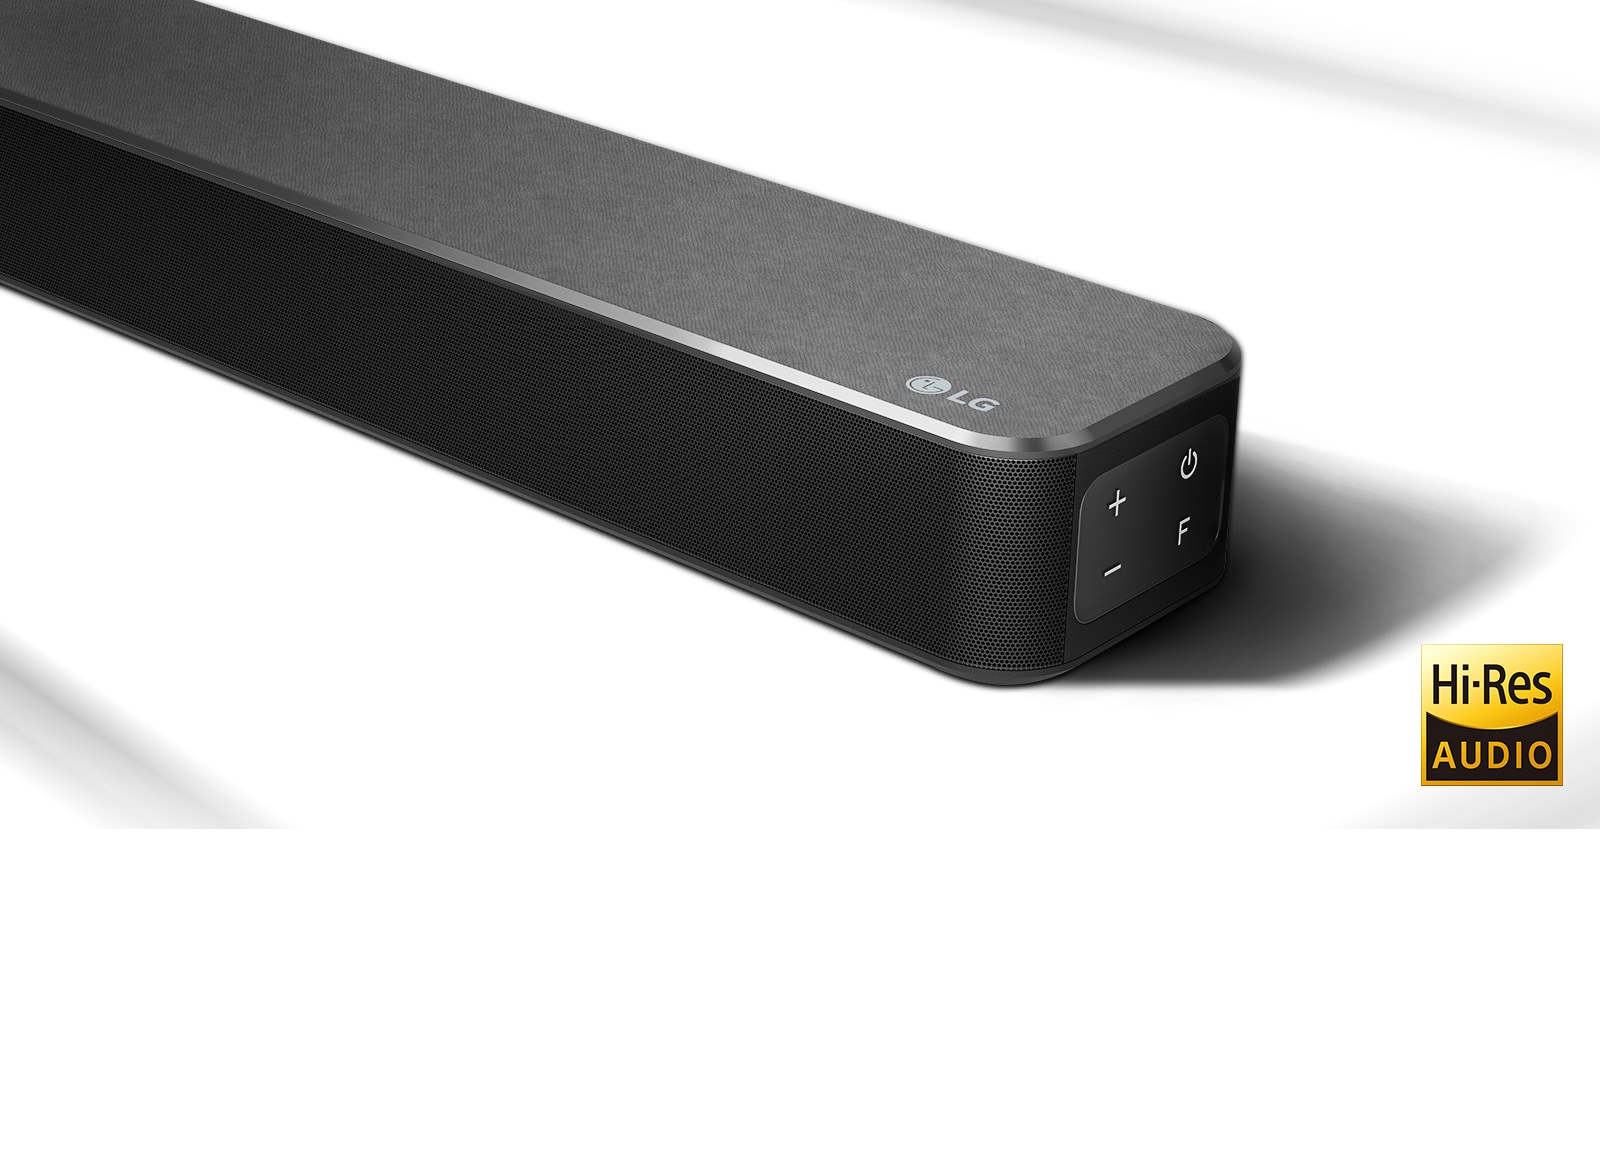 Close-up right side of LG Soundbar with LG logo shown on the bottom right corner. Hi-Res logo is shown below the product.